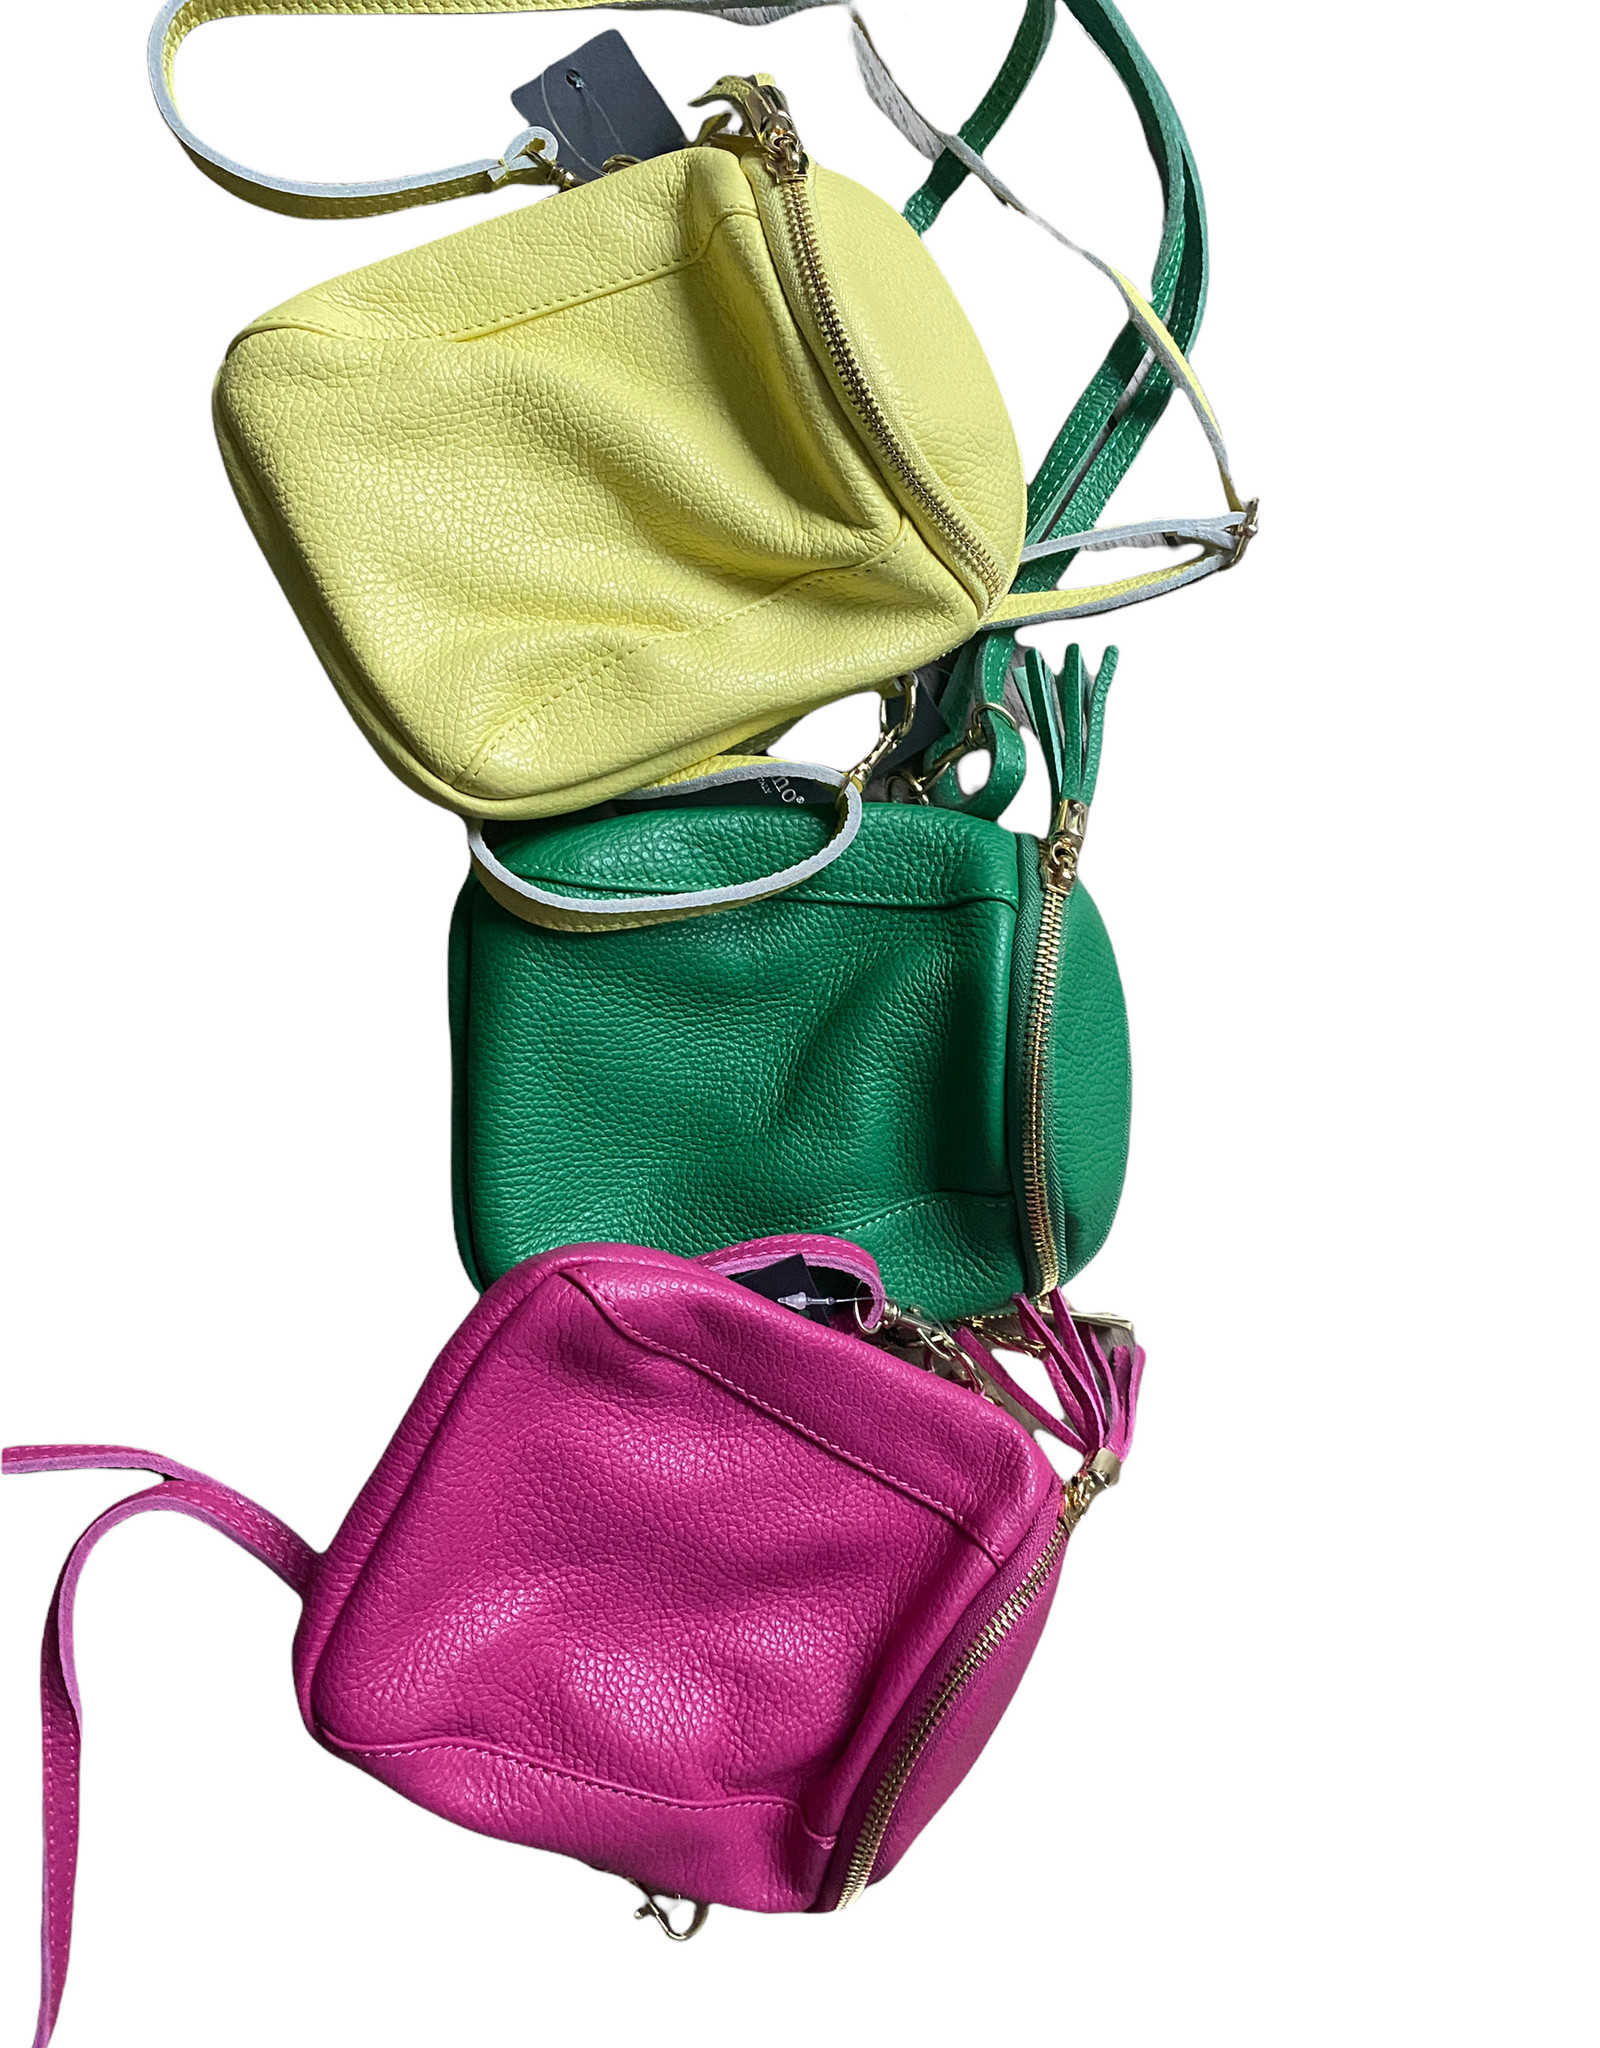 Little handy bags in several colors.